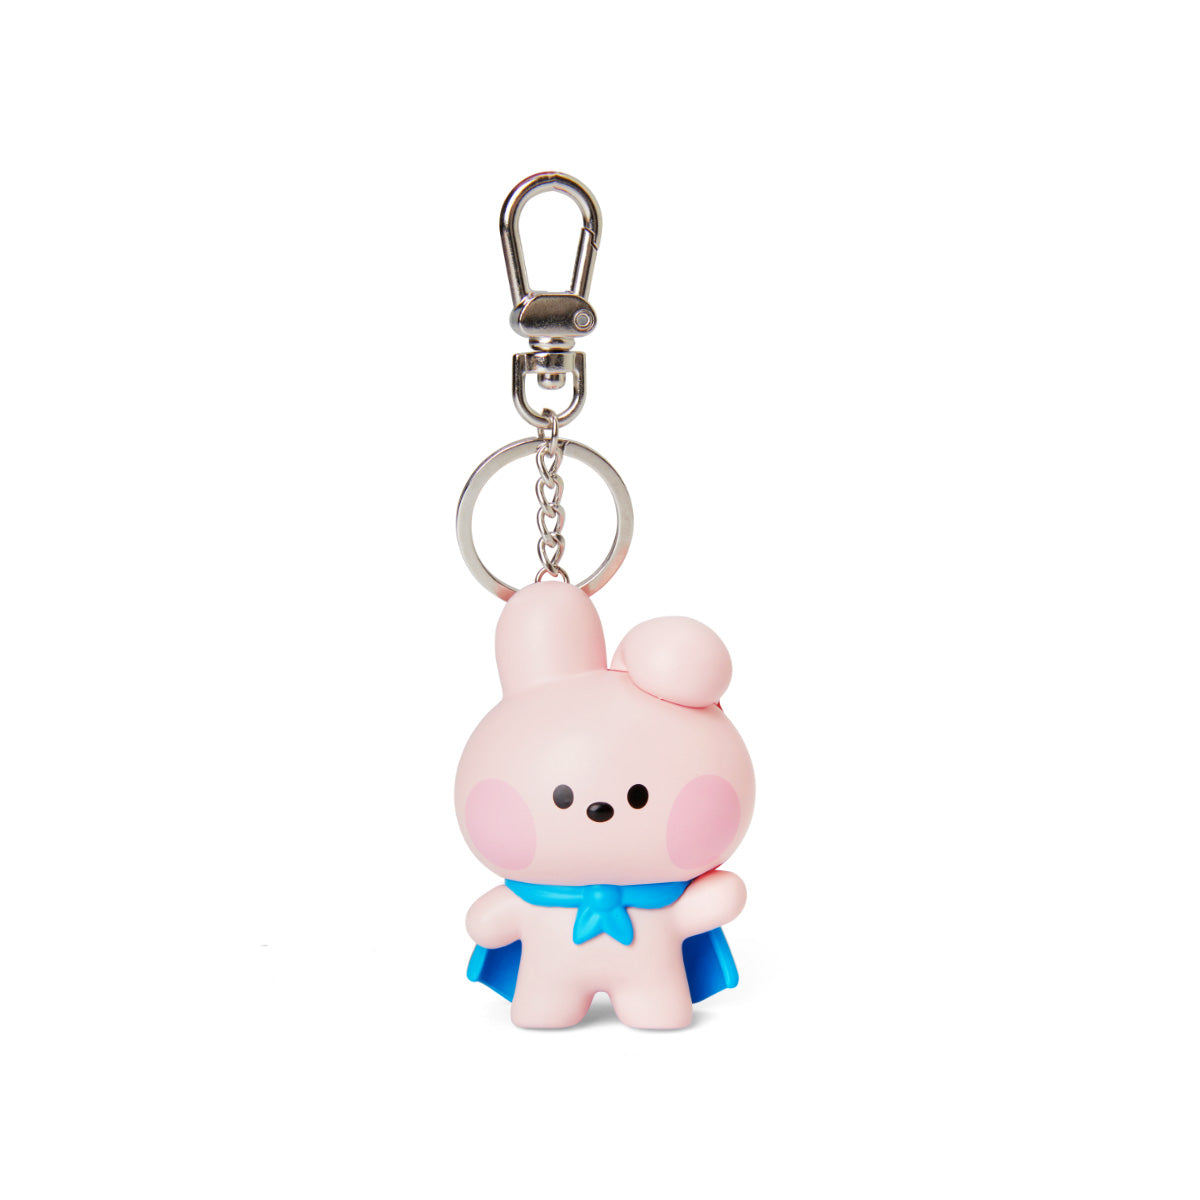 BT21 COOKY minini FIGURINE SOUND KEYRING – LINE FRIENDS COLLECTION STORE